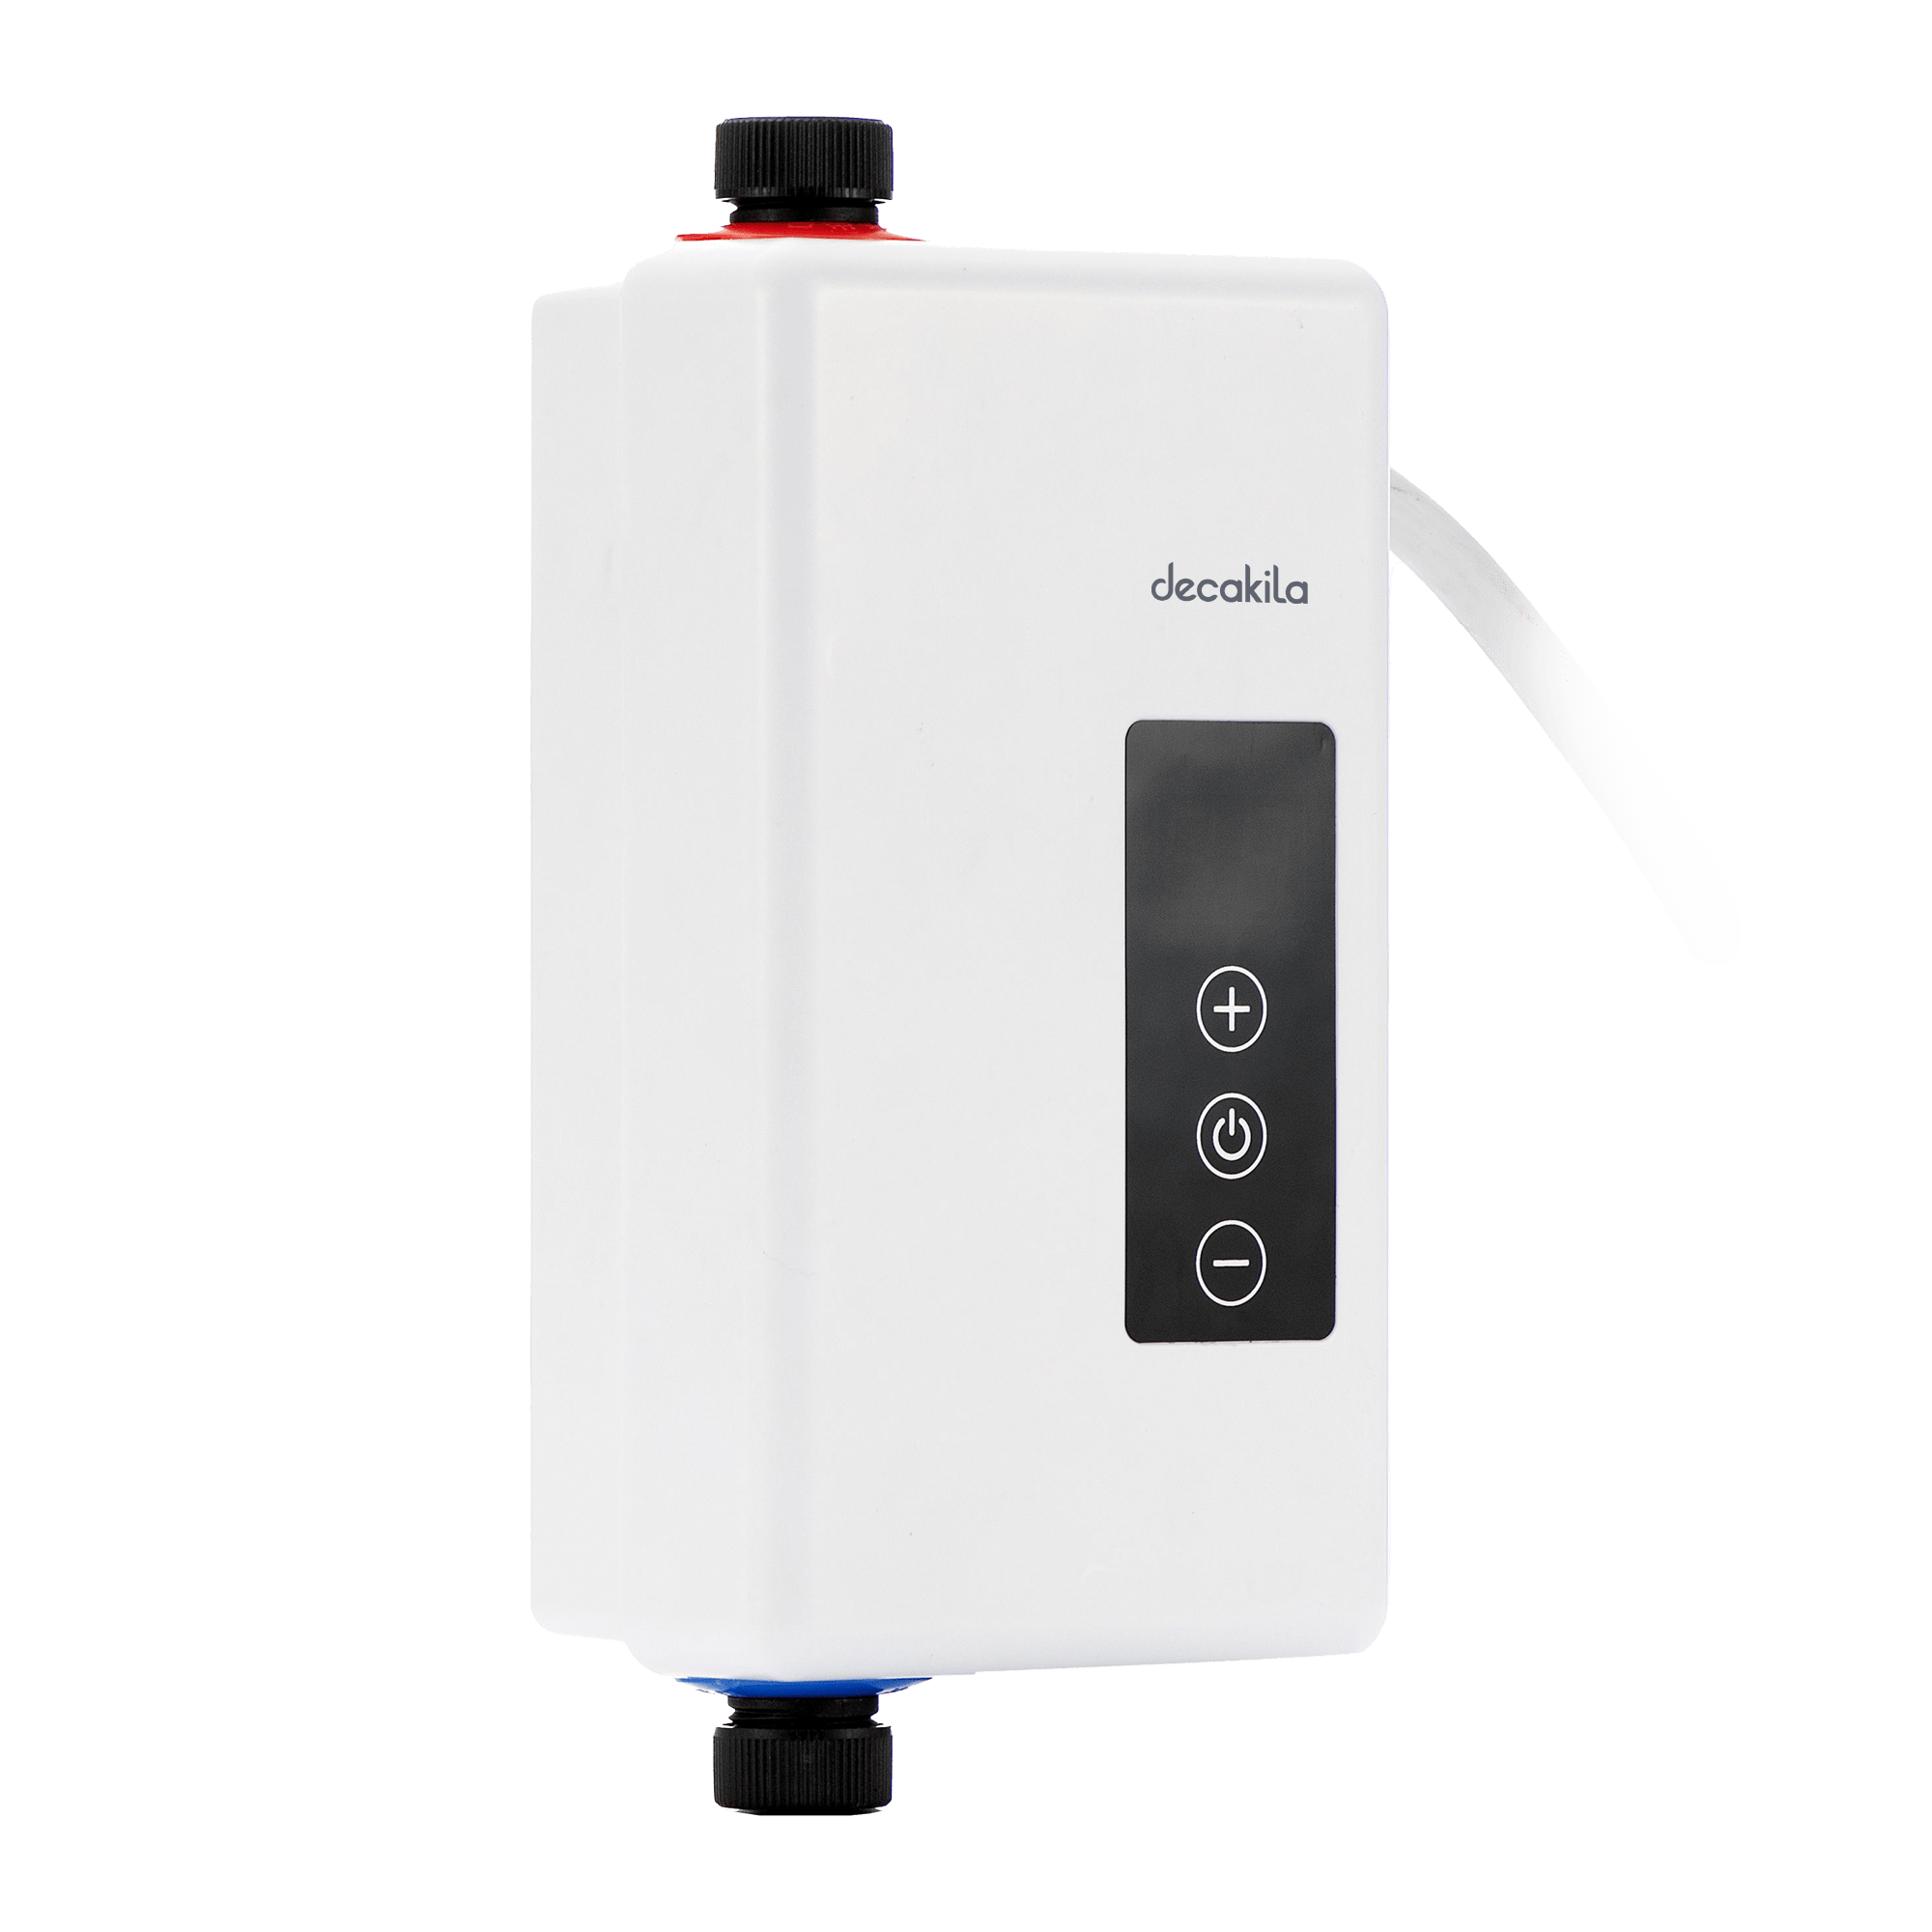 Decakila Instant Electric Water Heater 5500W - KEWH002W | Buy Online in Accra, Ghana - Supply Master Water Heater Buy Tools hardware Building materials